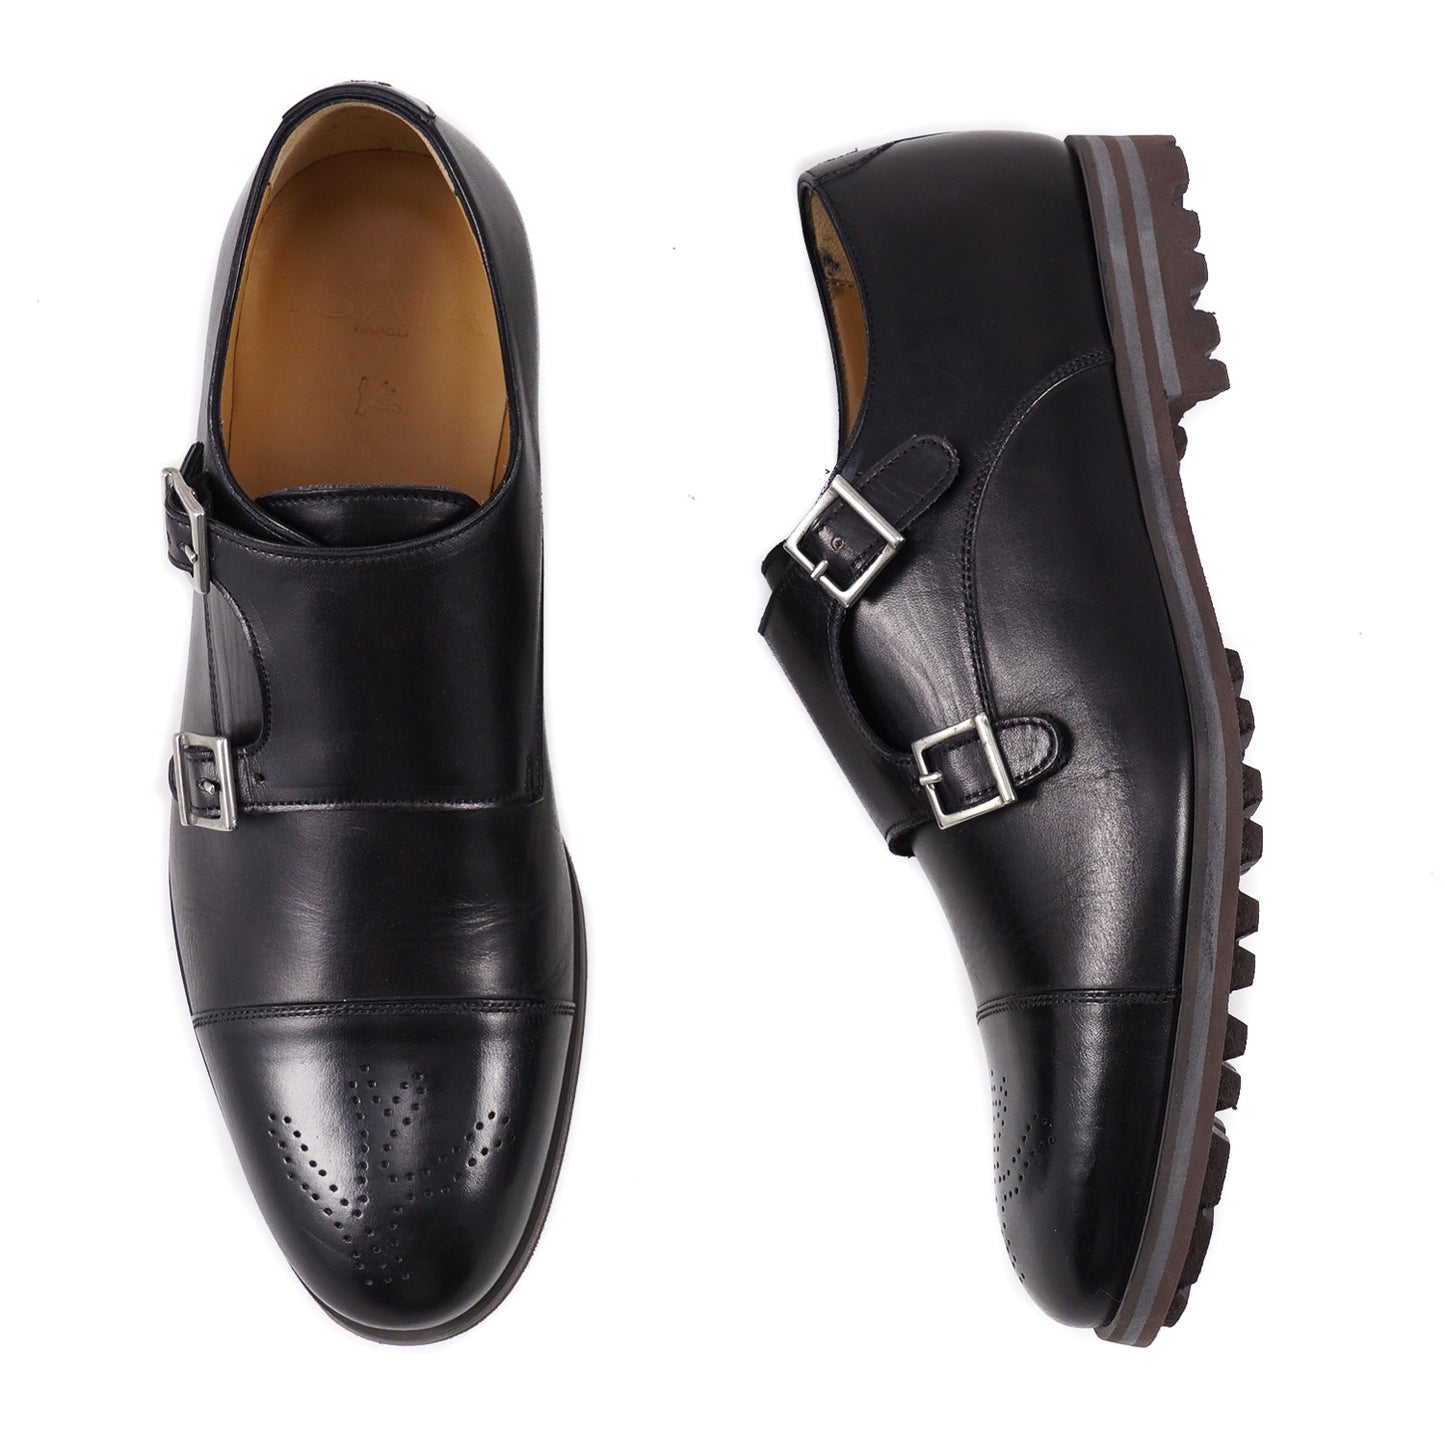 Isaia Double Buckle Monk Strap with Lightweight Sole - Top Shelf Apparel